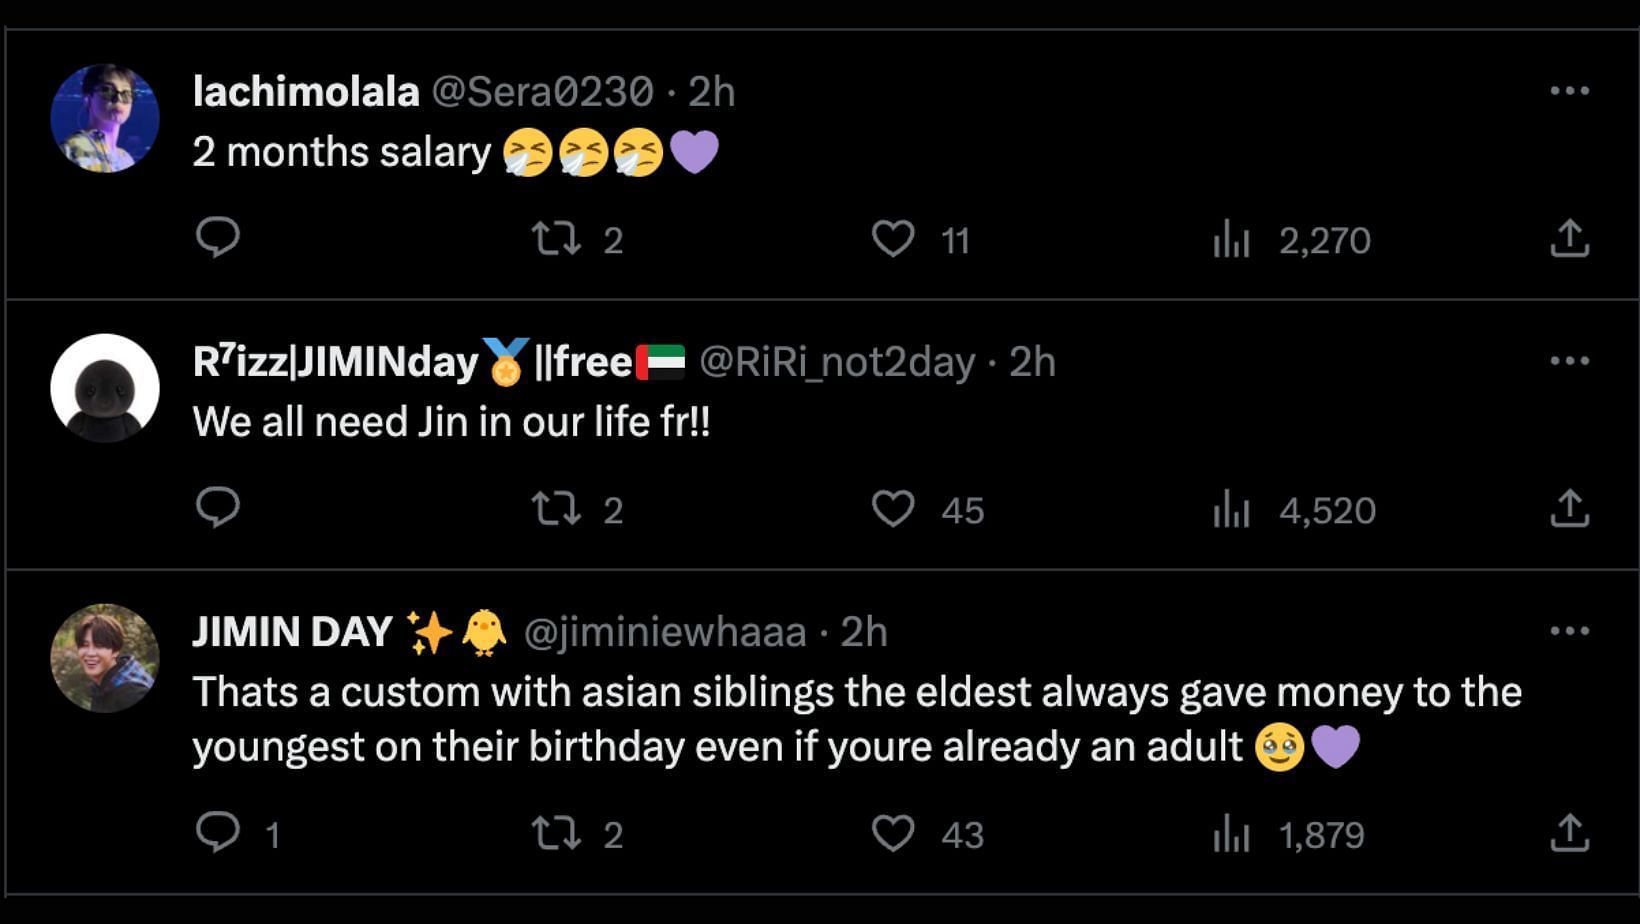 Fans react as Jin gave the BTS idol his two months&#039; salary as his birthday gift. (Image via X/ @Sera0230, @RiRi_not2day, @jiminiewhaaa)